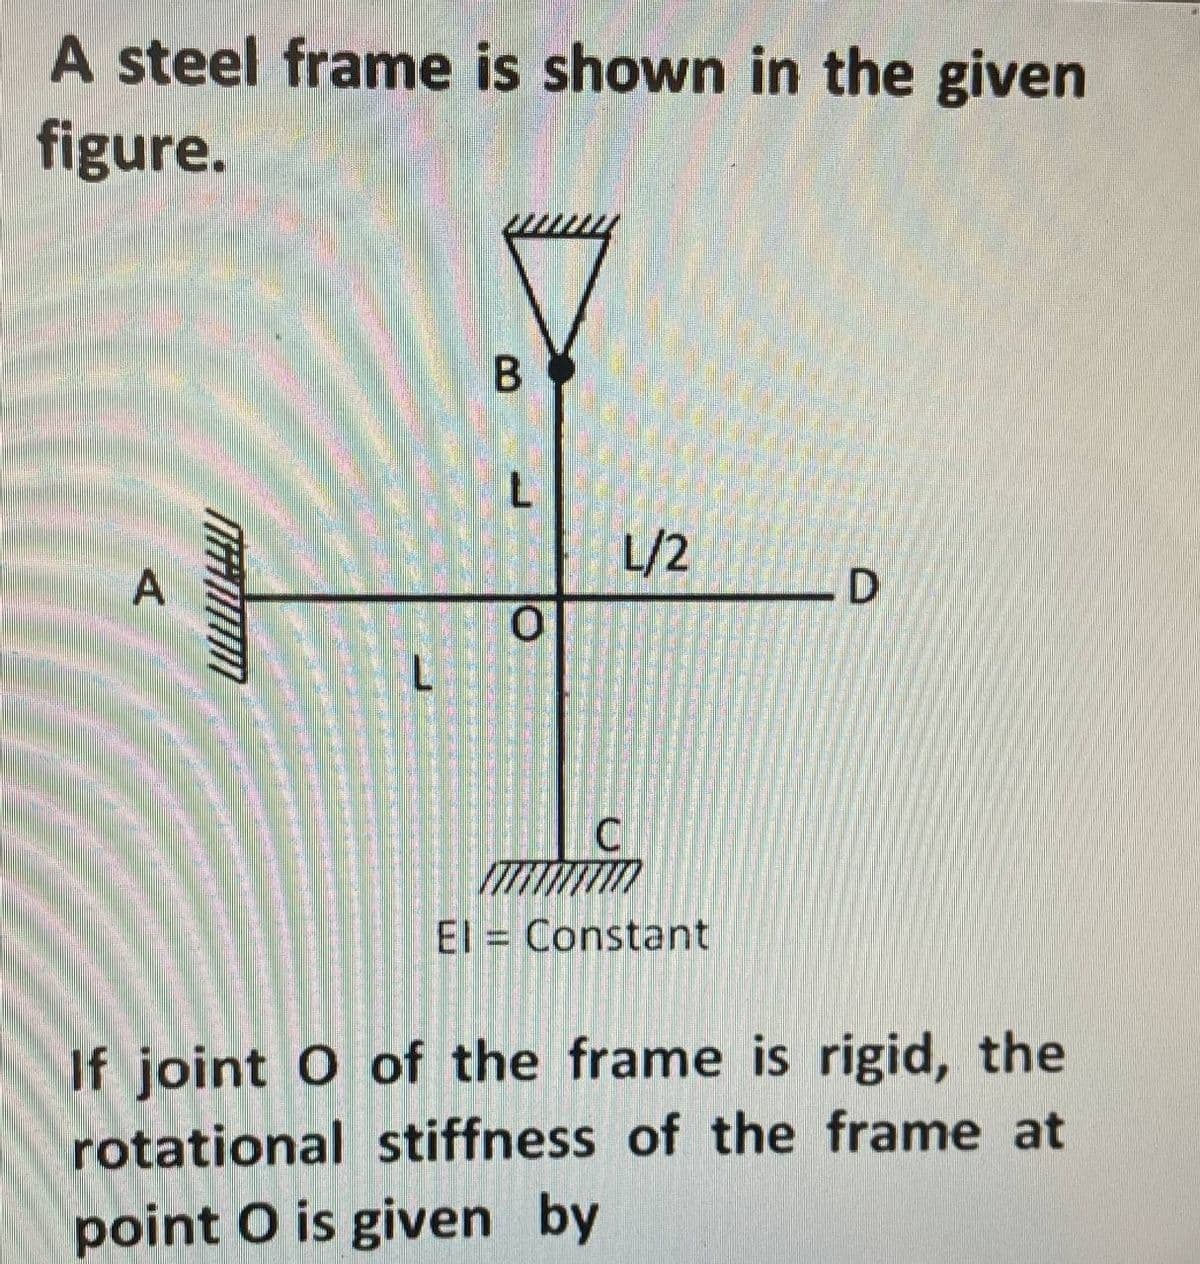 A steel frame is shown in the given
figure.
A
MANUM
L
B
L
O
L/2
C
VITKANTIN
El Constant
D
If joint O of the frame is rigid, the
rotational stiffness of the frame at
point O is given by